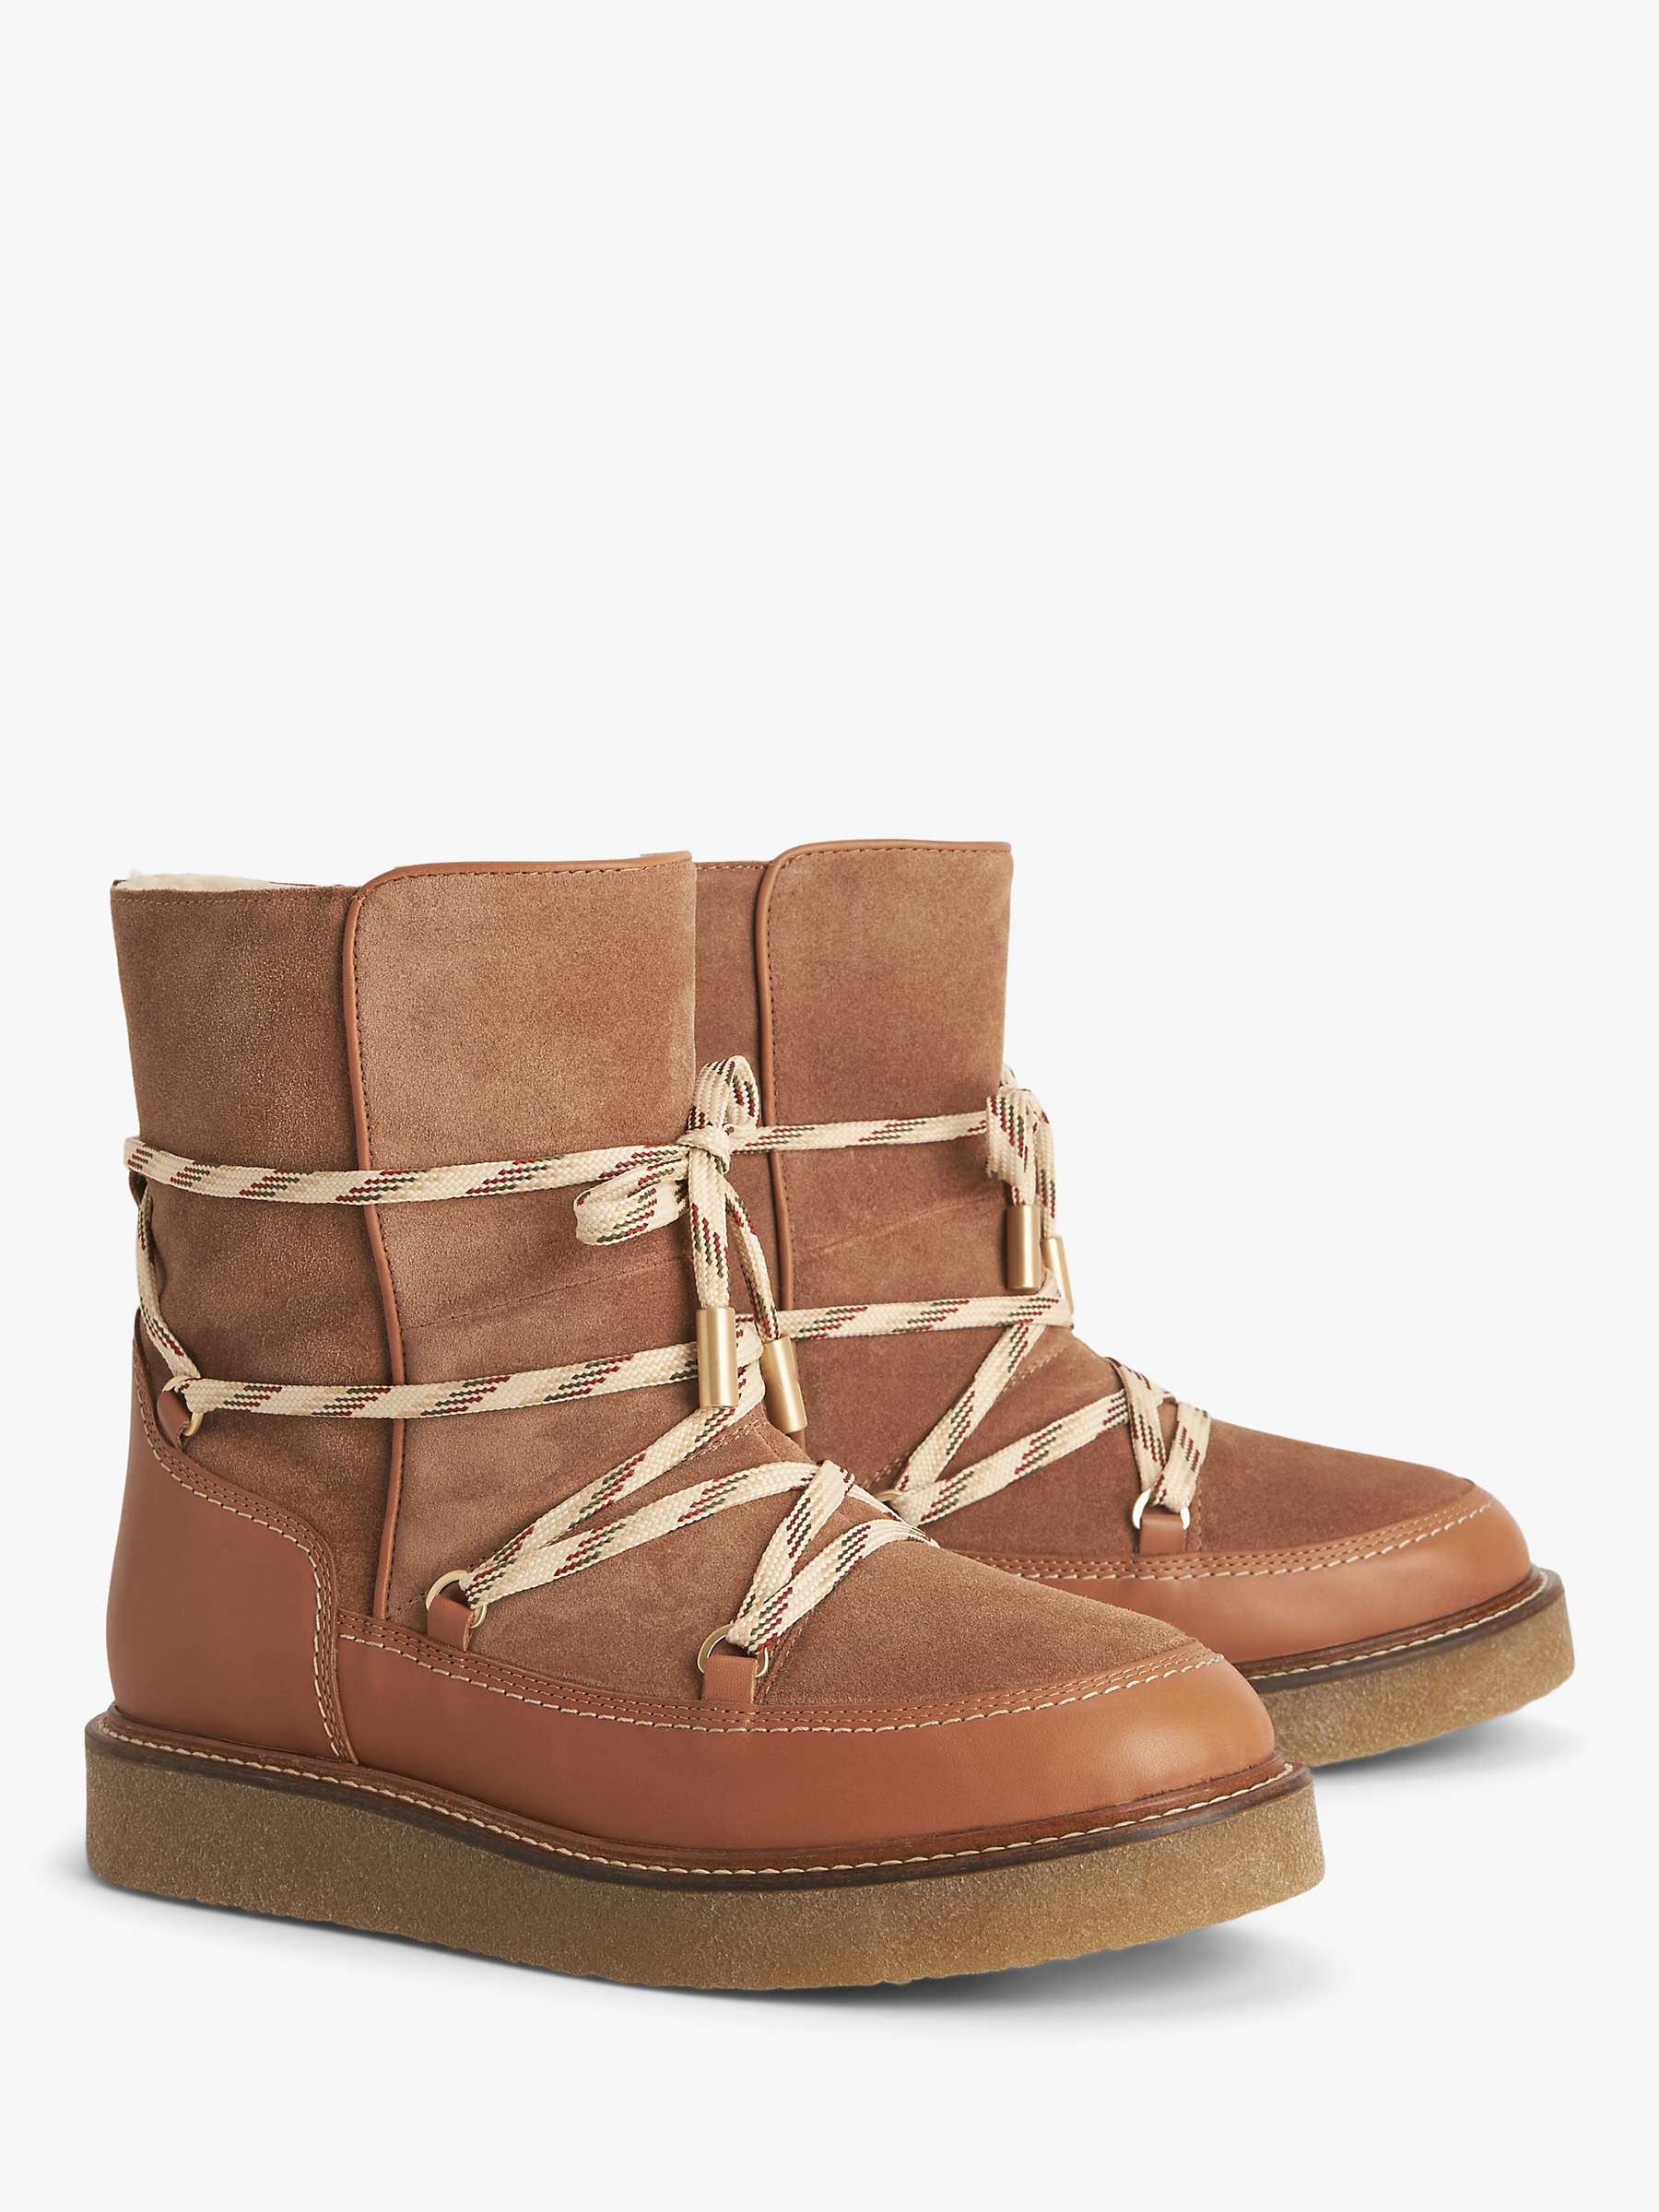 Buy AND/OR Pilot Leather/Suede Lace Up Crepe Sole Snow Boots, Brown/Tan Online at johnlewis.com